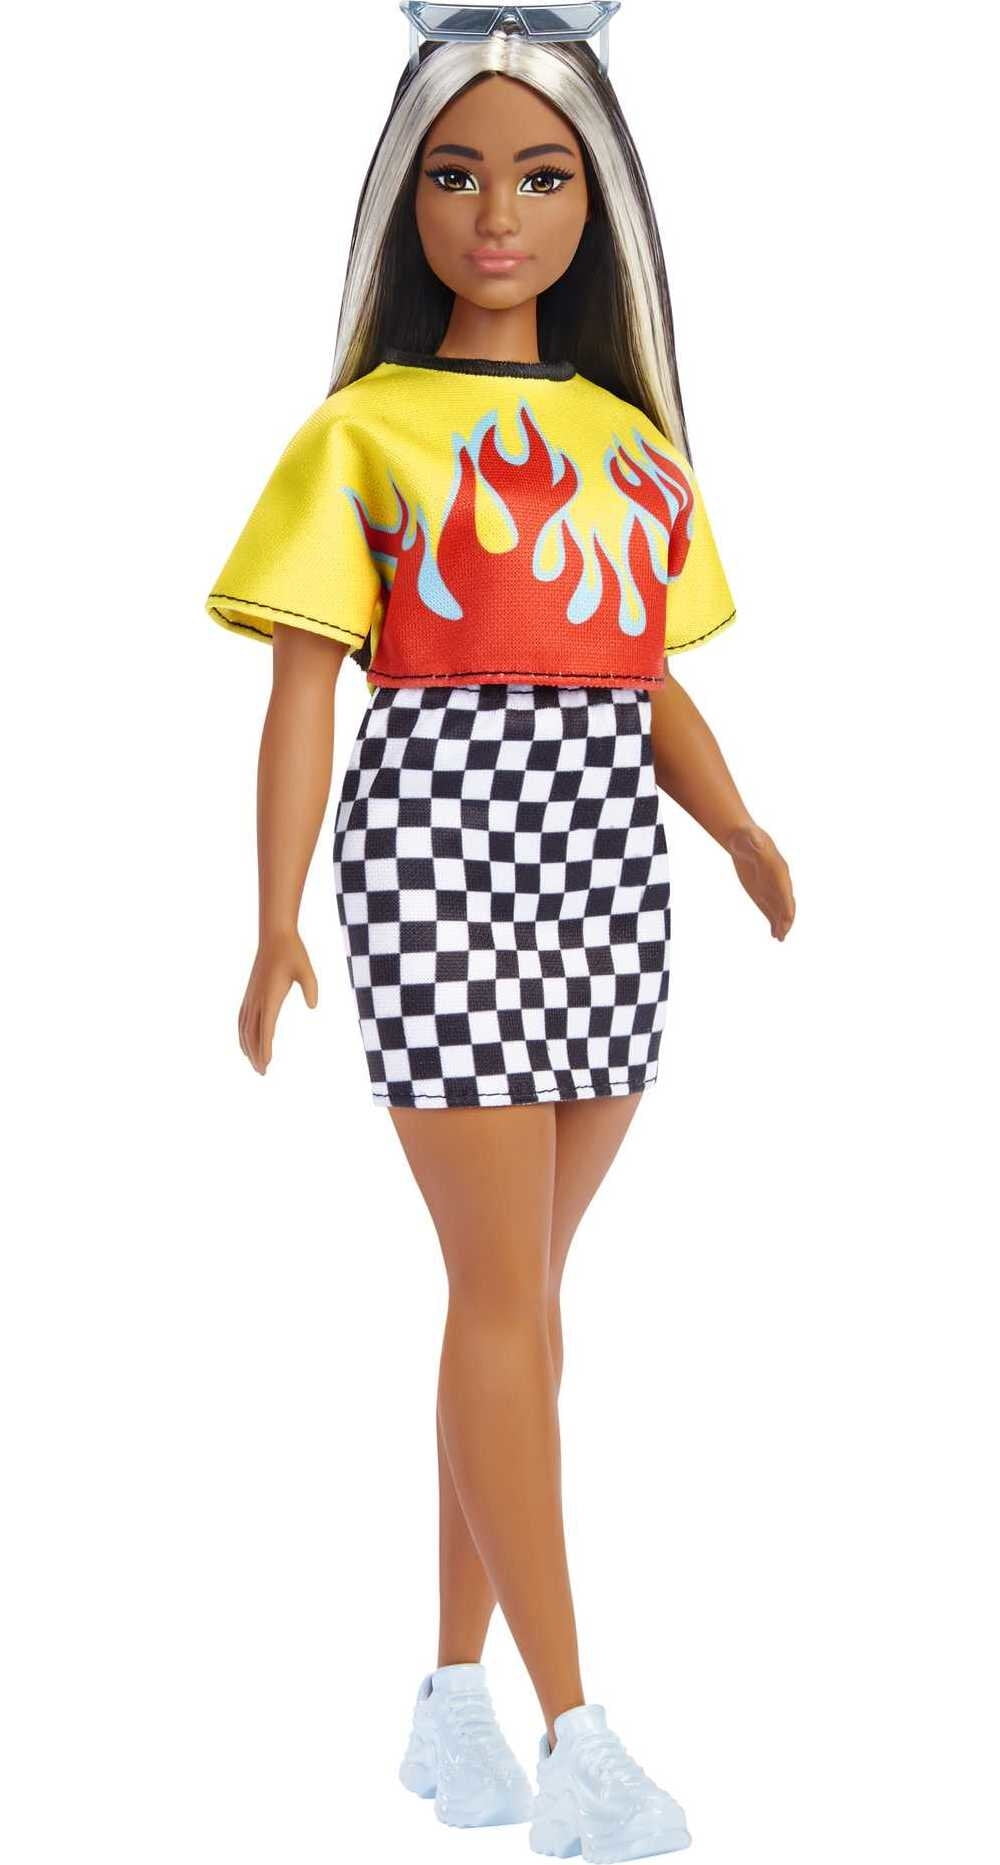 Barbie Fashionistas Doll #179, Curvy with Long Highlighted Hair in Crop Top  & Checkered Skirt